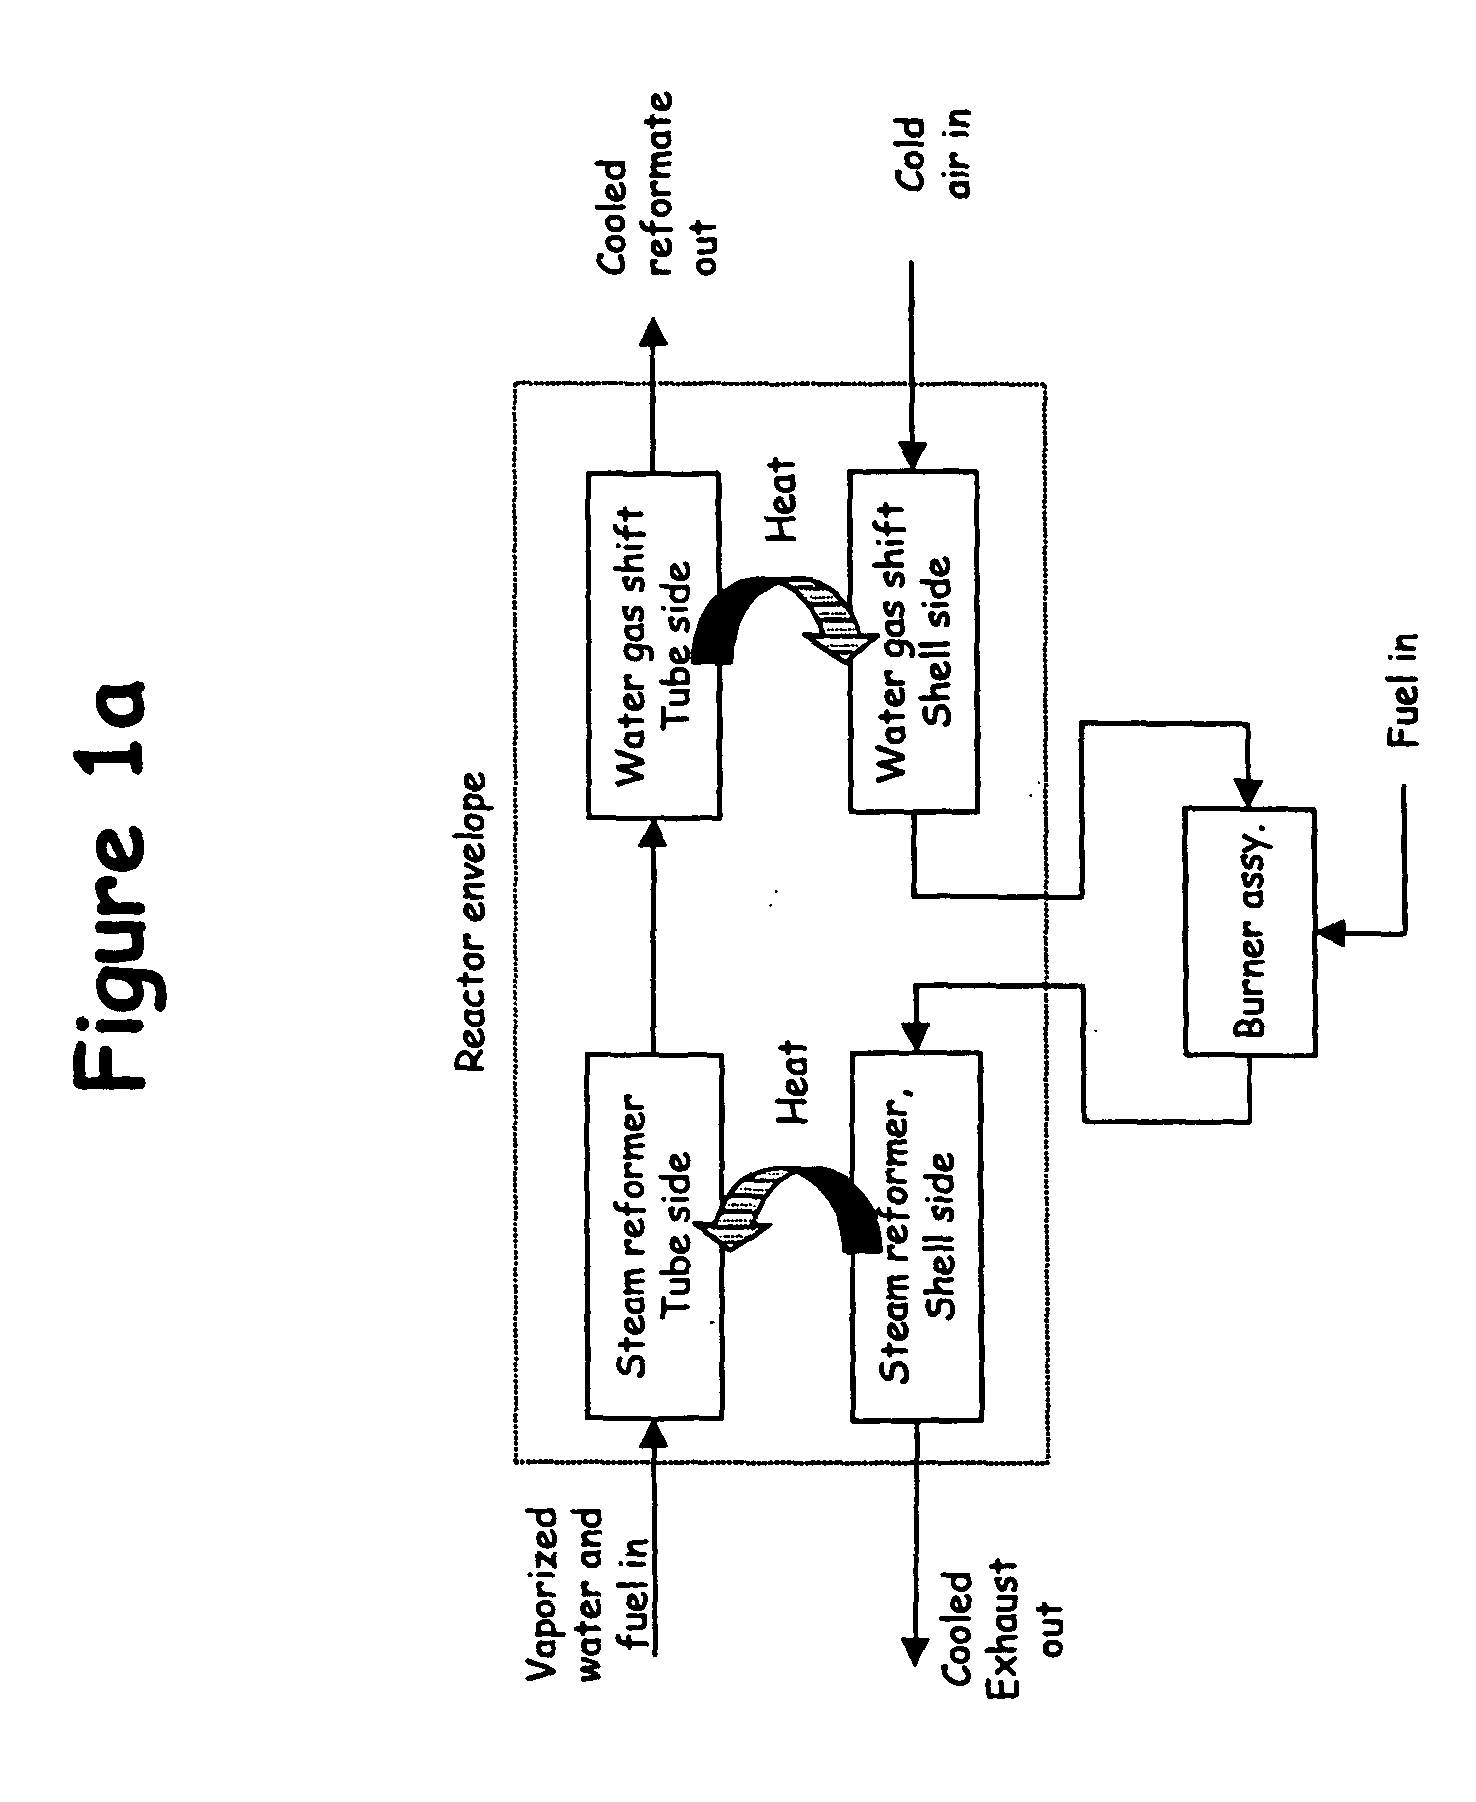 System for hydrogen generation through steam reforming of hydrocarbons and intergrated chemical reactor for hydrogen production from hydrocarbons